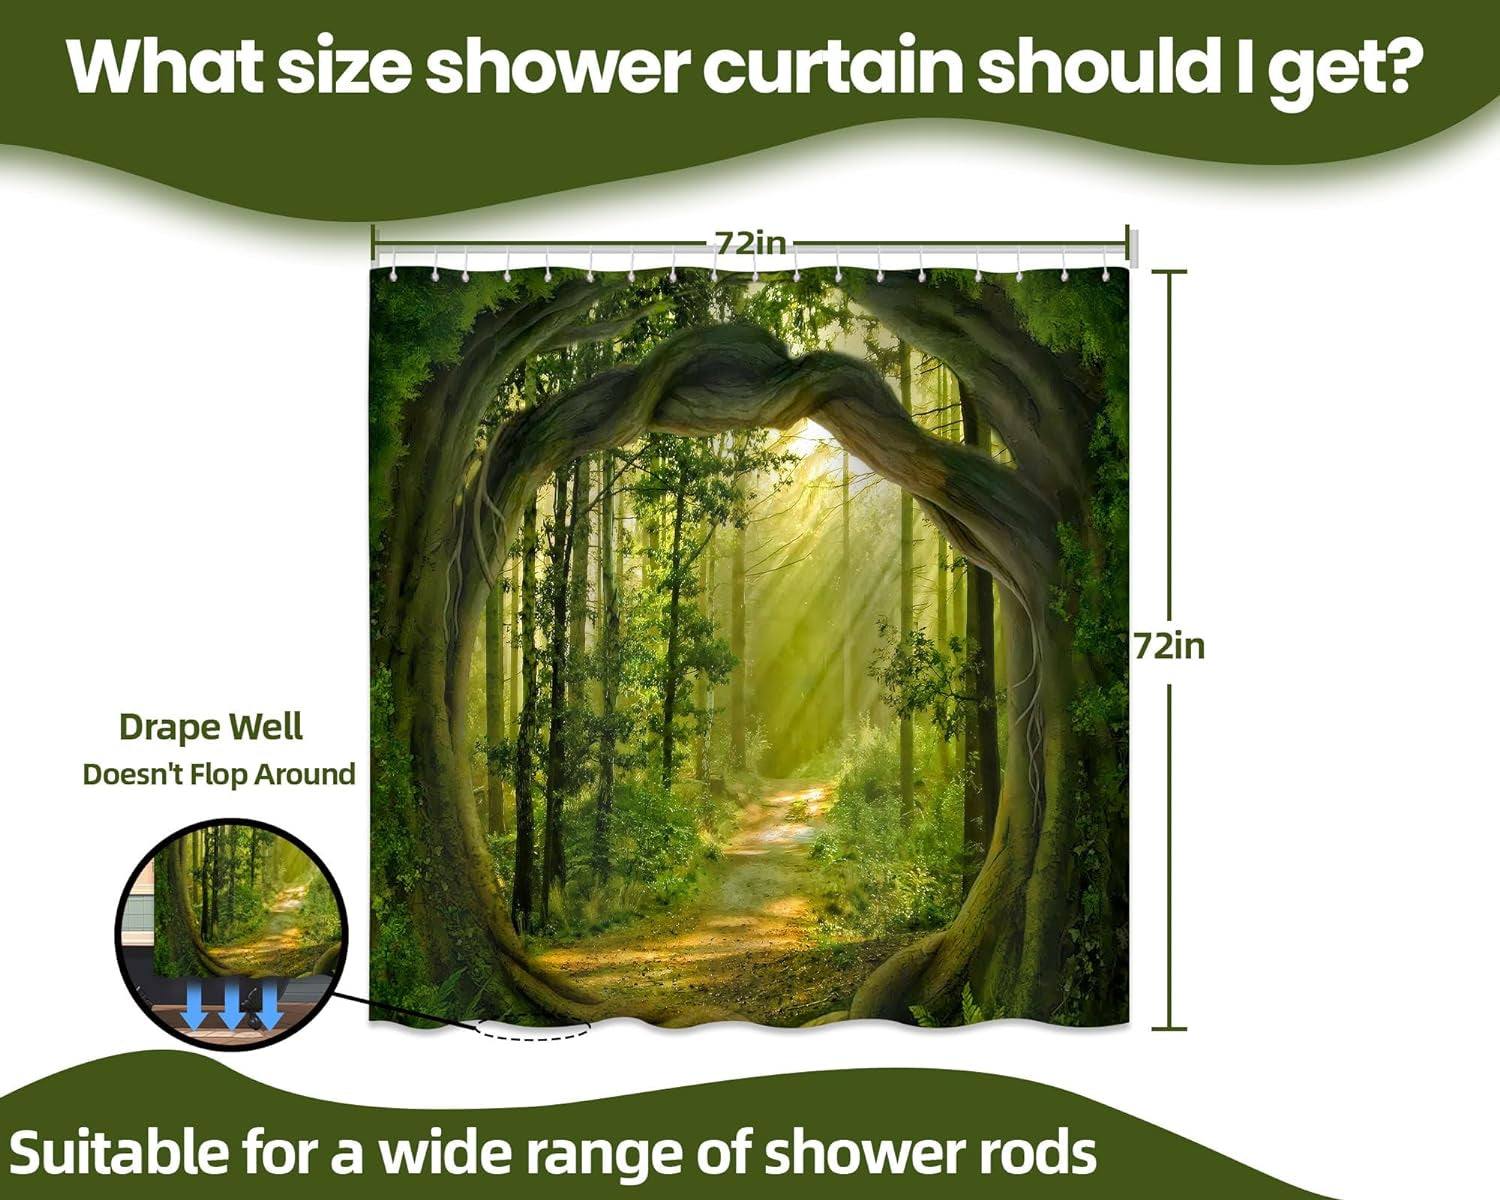 Enchanted Forest Shower Curtain, Green Tree Nature Shower Curtains for Bathroom Decor Outdoor Scenery Spring Scenic Landscape Bath Curtain, Waterproof Polyester Fabric with Hooks, 72X72In